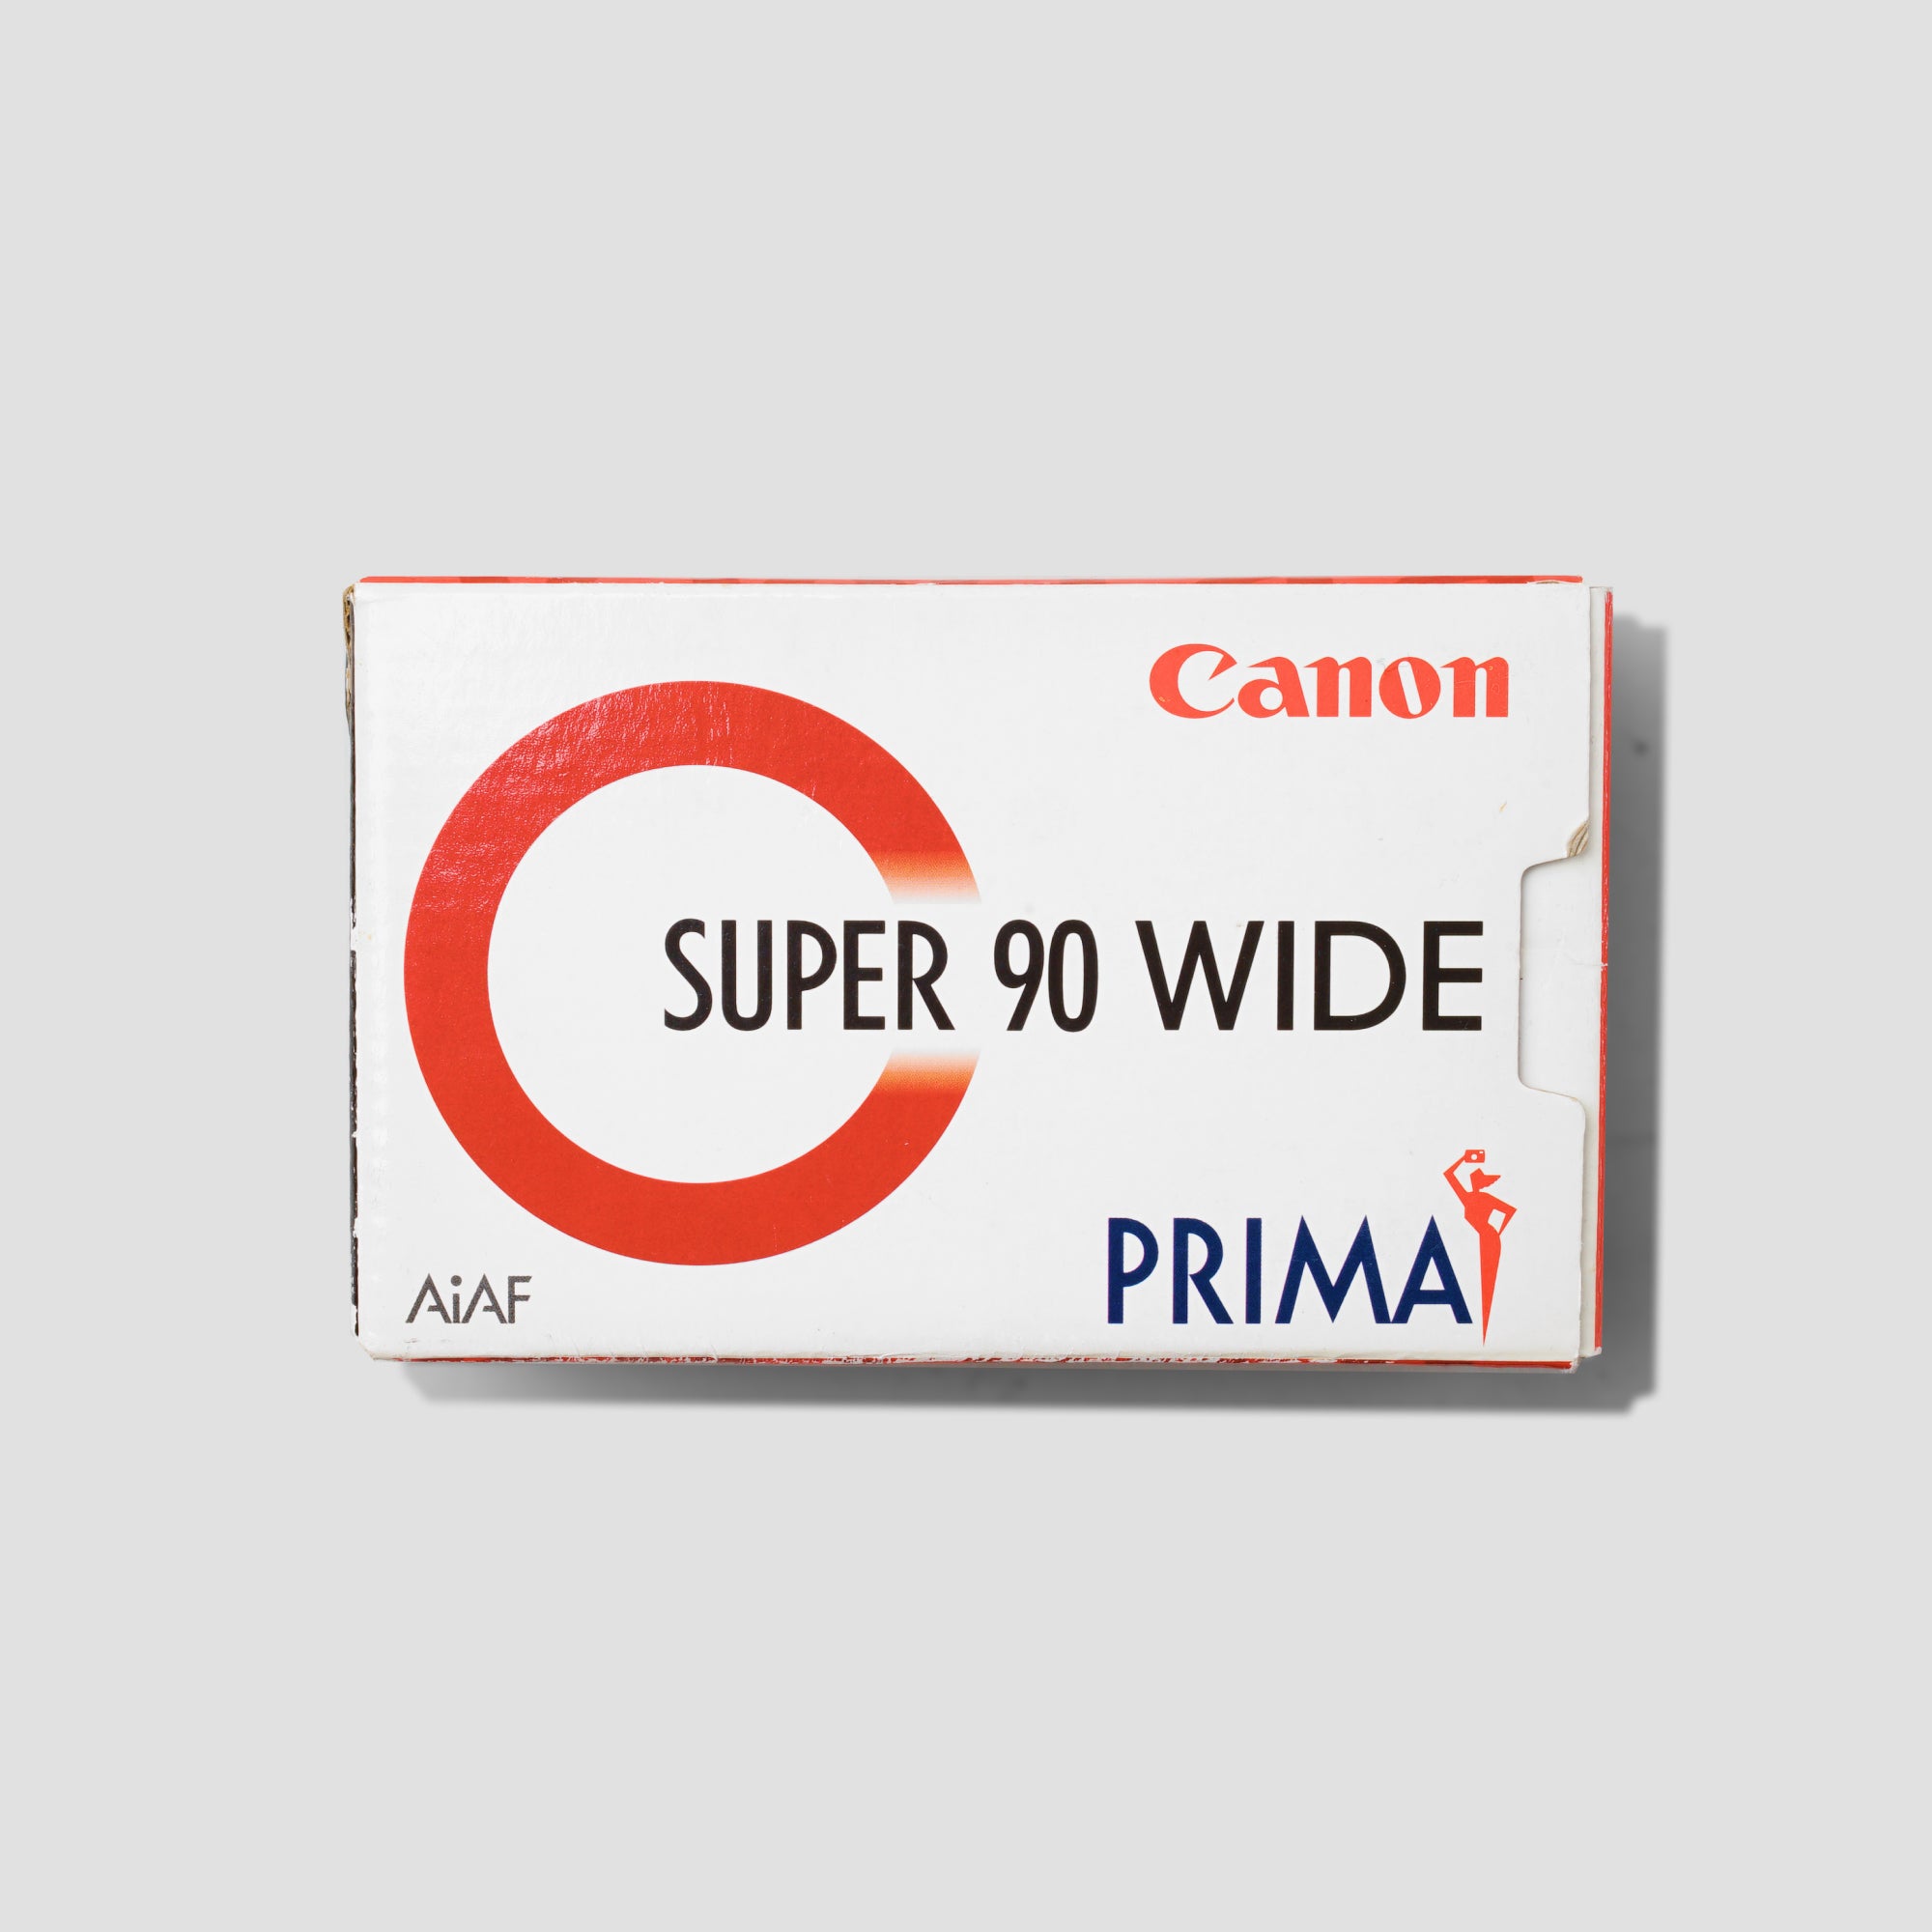 Buy Canon Prima Super 90 Wide now at Analogue Amsterdam